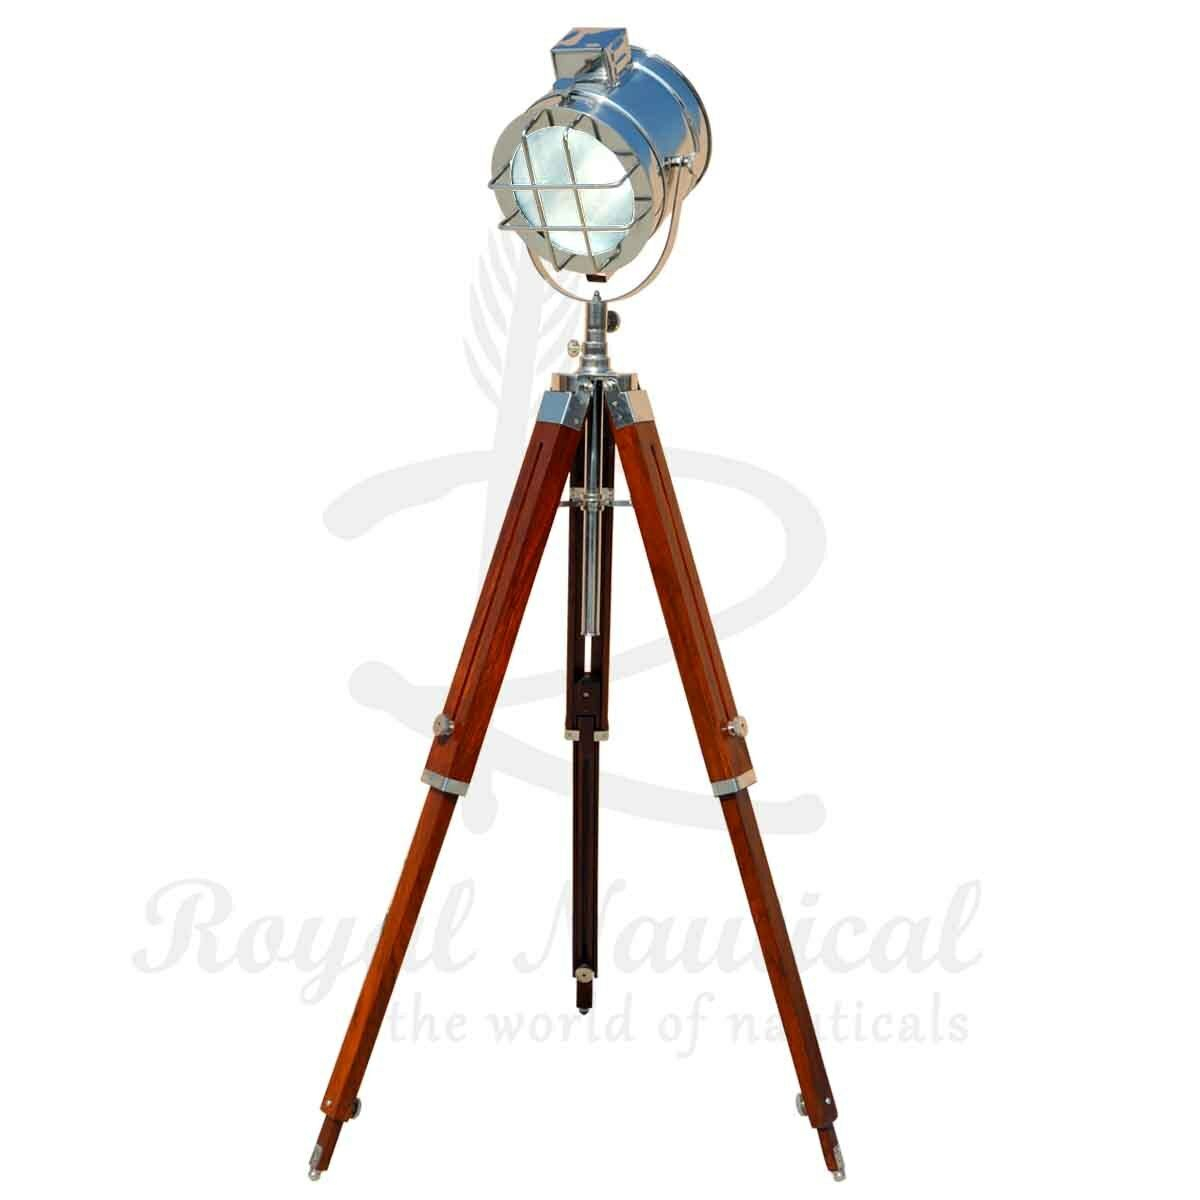 Details About Tripod Floor Lamp Nautical Spotlight Vintage Studio Wooden Light Home Office New with regard to size 1200 X 1200